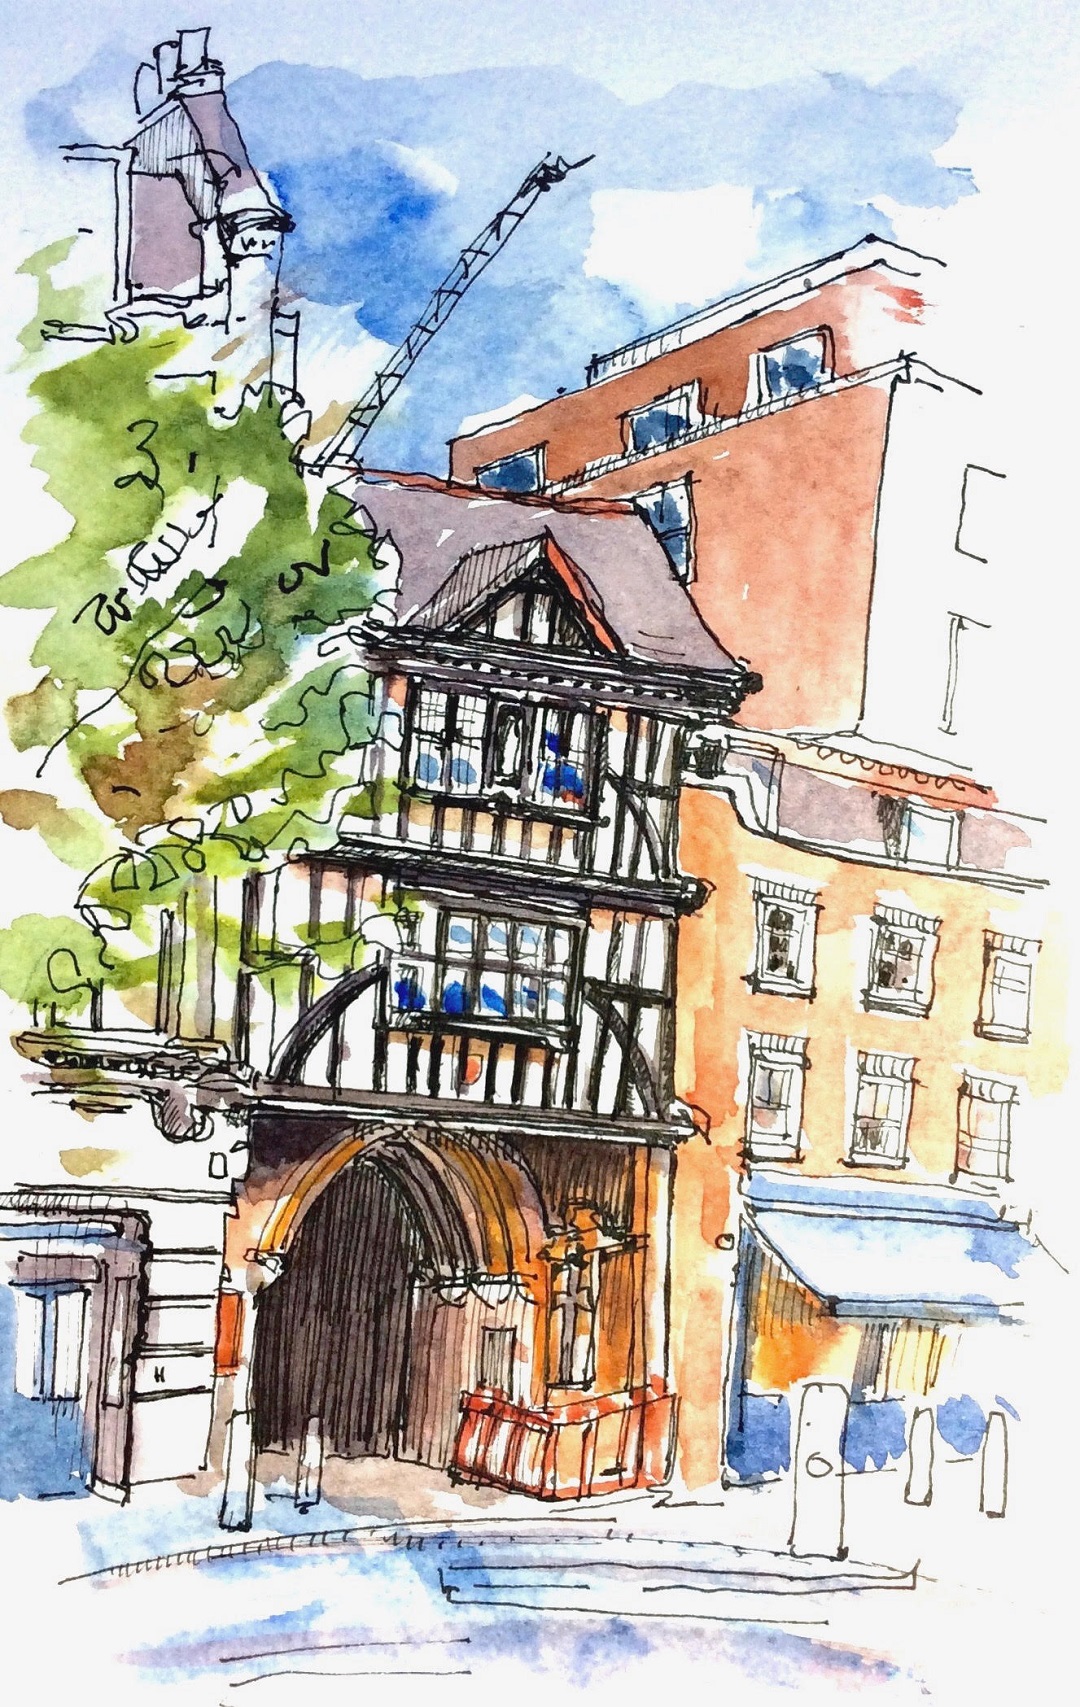 Smithfield, London, October 2016 Katie Clare Pen and Wash, drawn in the artist's Moleskine watercolour sketchbook, 13 x 21 cm